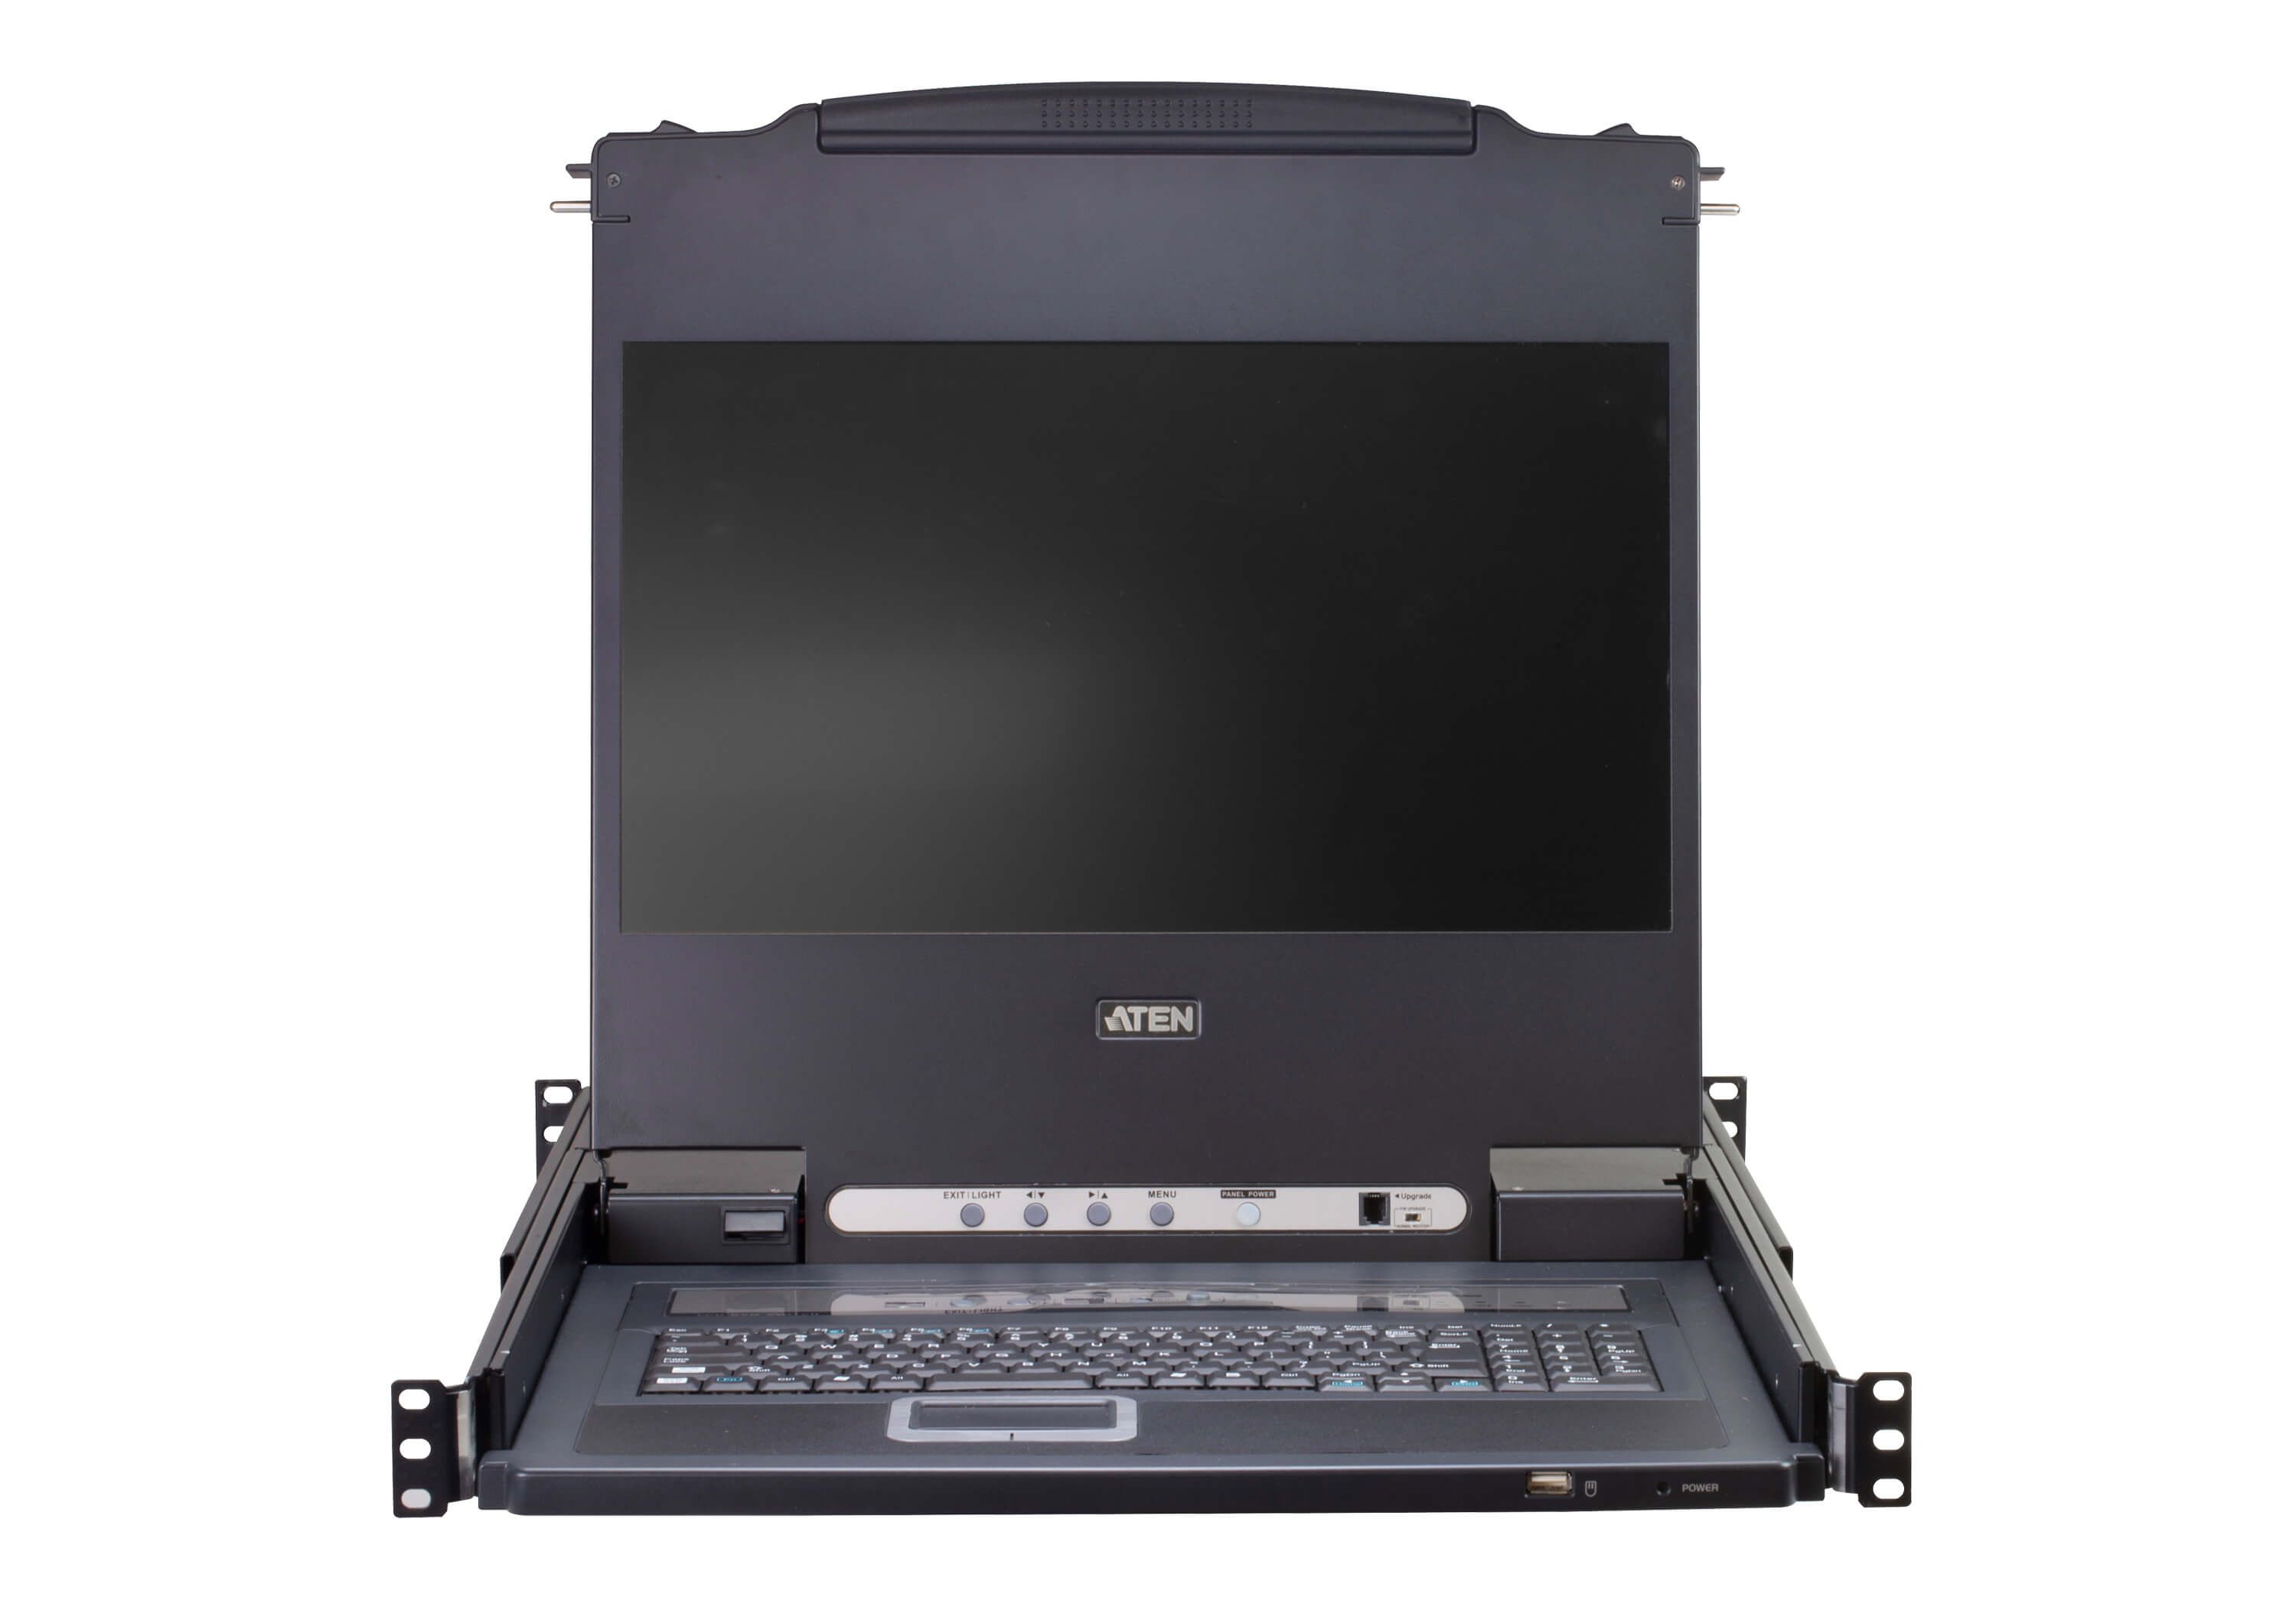 Aten 8-Port PS/2-USB VGA Single Rail LCD KVM Switch- CL5708M (1 Year Manufacture Local Warranty In Singapore)